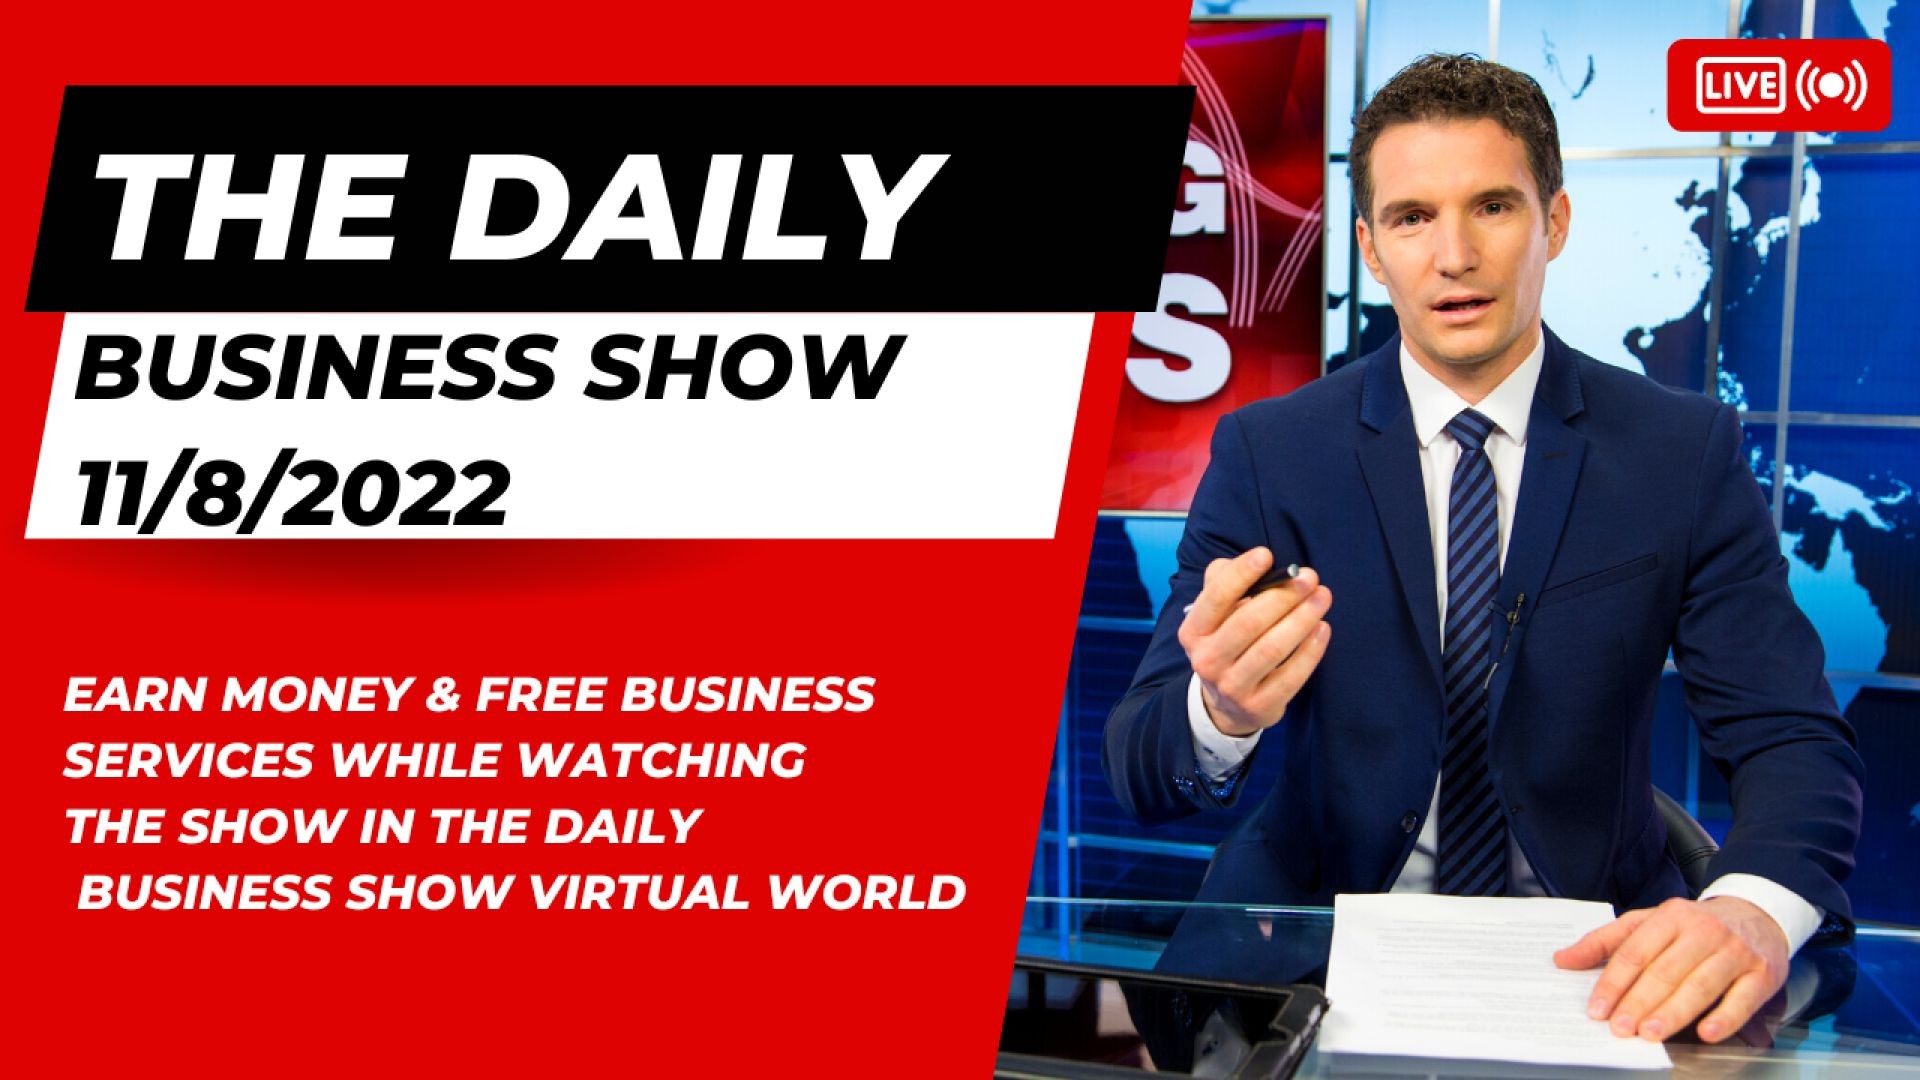 ⁣The Daily Business Show (Earn Free Money In Daily Business Show Virtual World)